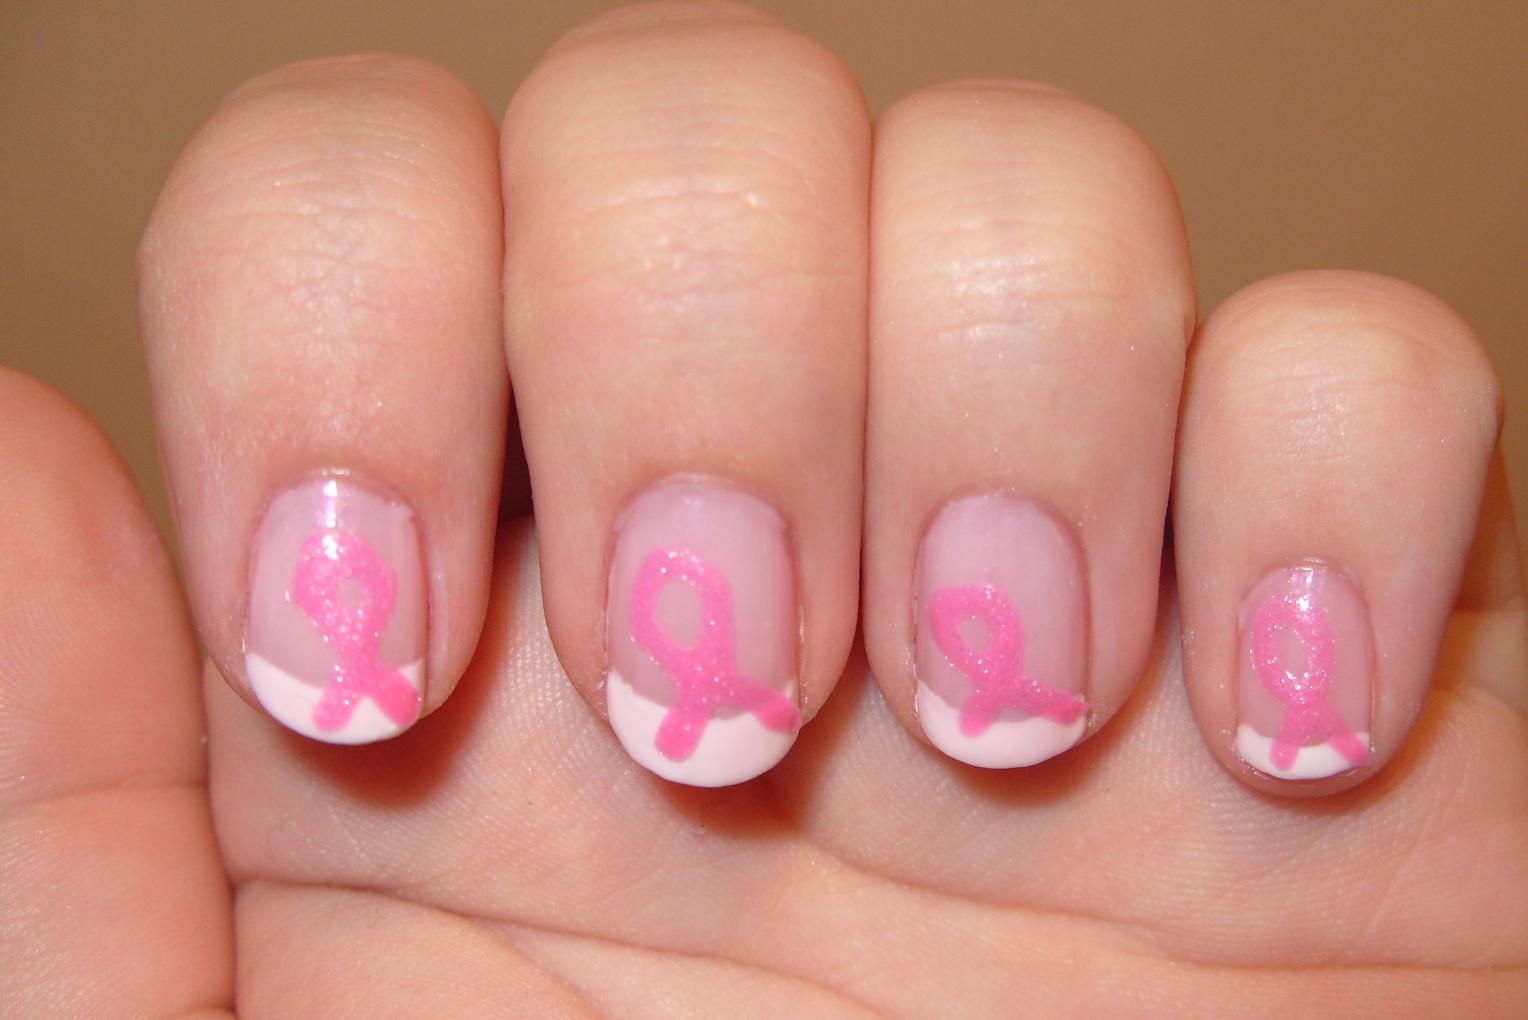 2. Breast Cancer Awareness Nail Art - wide 5